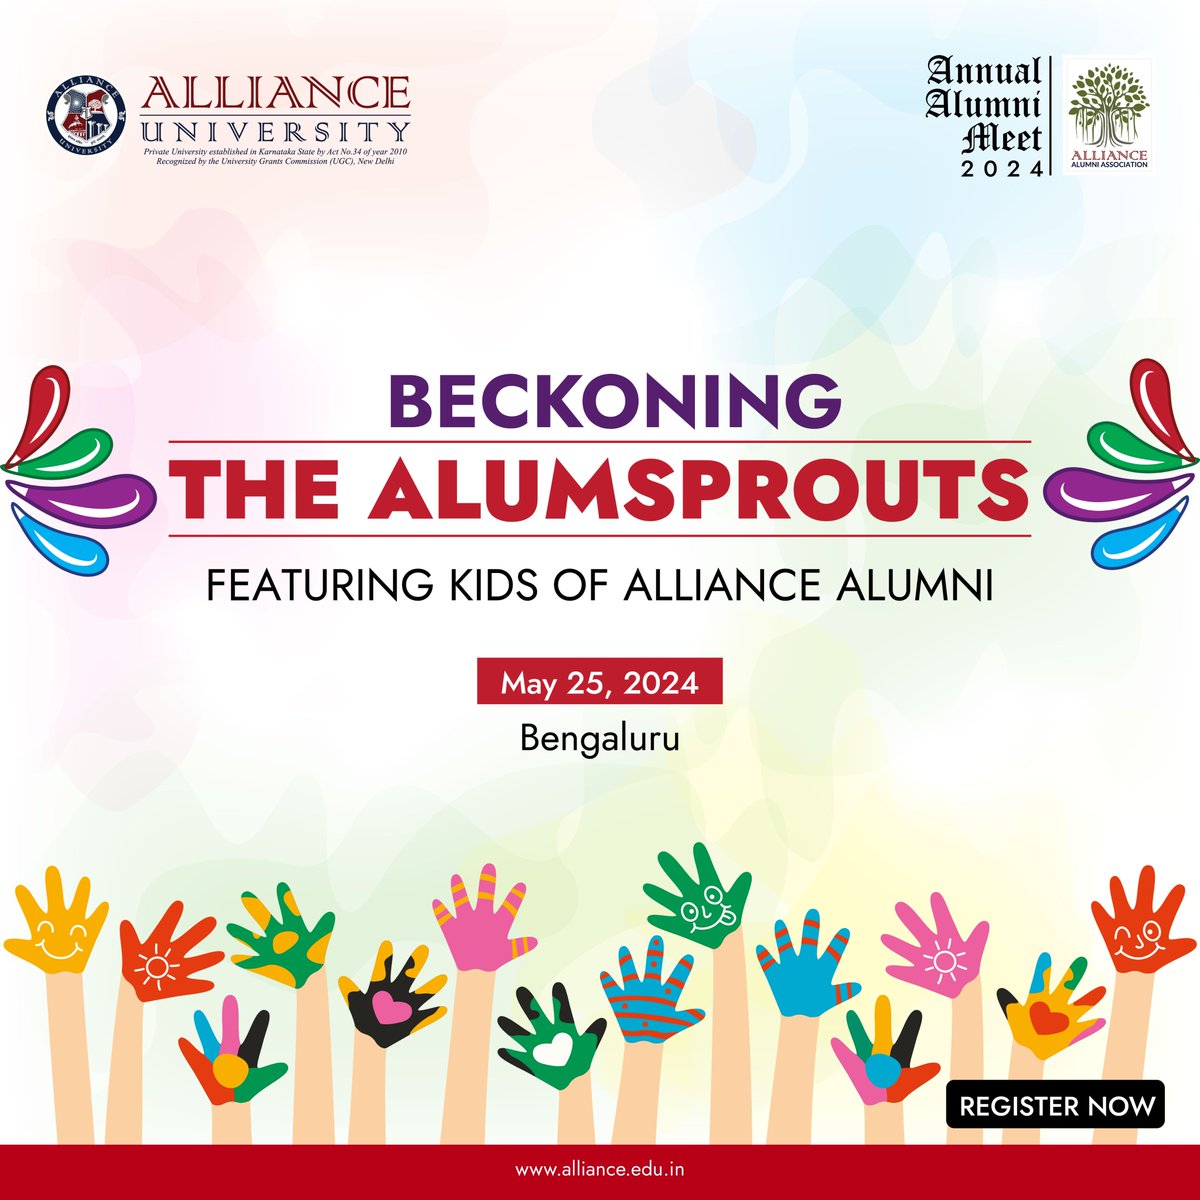 'Beckoning the AlumSprouts' | Alliance Alumni Meet 2024
Get ready to be dazzled by the next generation of talent! Our alumni's kids are gearing up for an unforgettable performance.

Register here for 'Beckoning the AlumSprouts': forms.gle/nmcKNQK8Gz8GjG…

#allianceuniversity